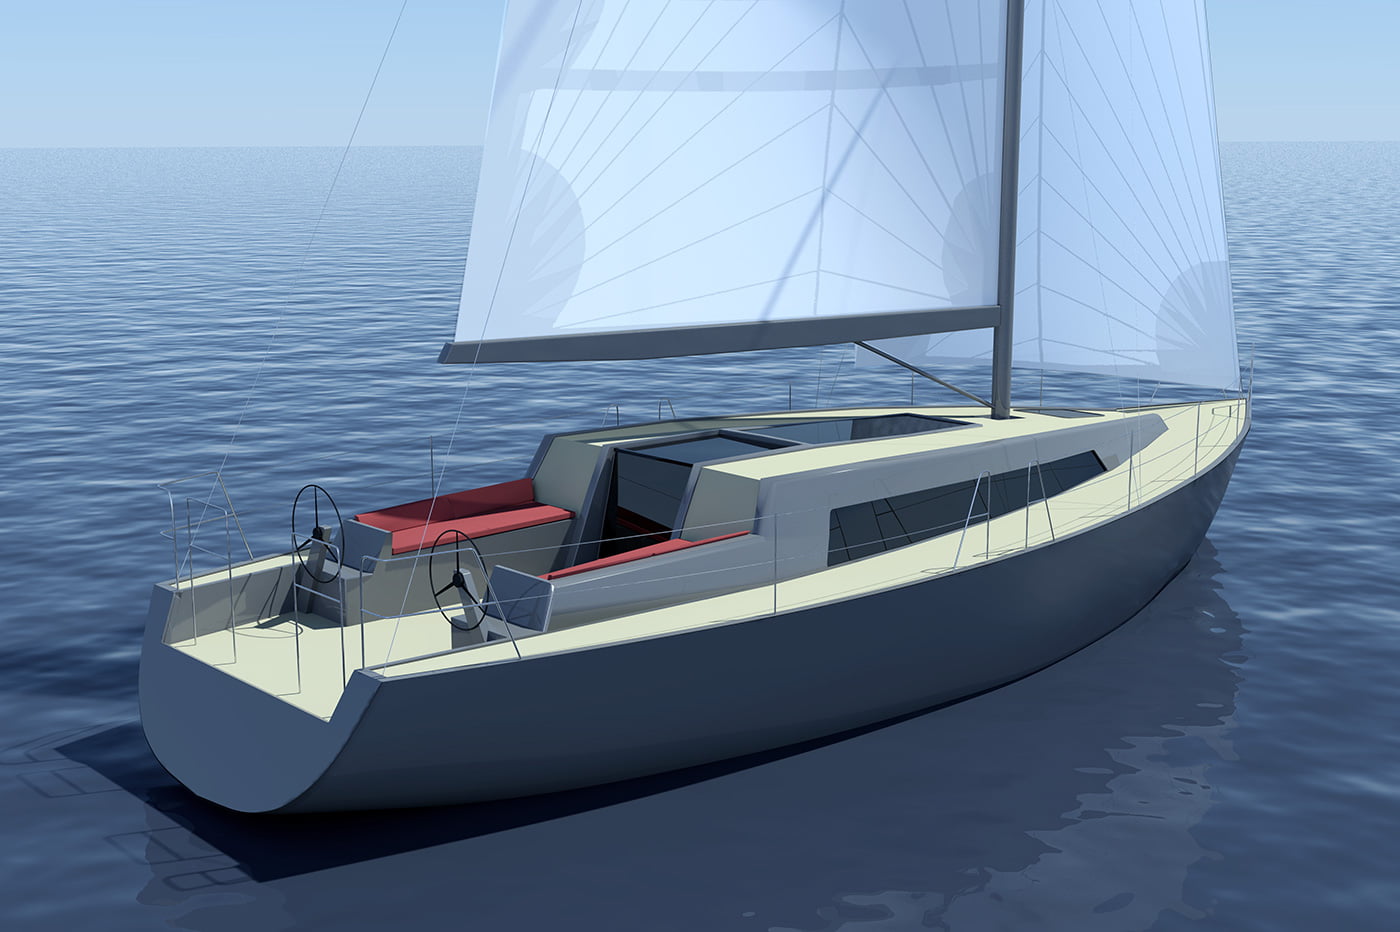 Sea sailing yacht sloop type exterior design view from aft